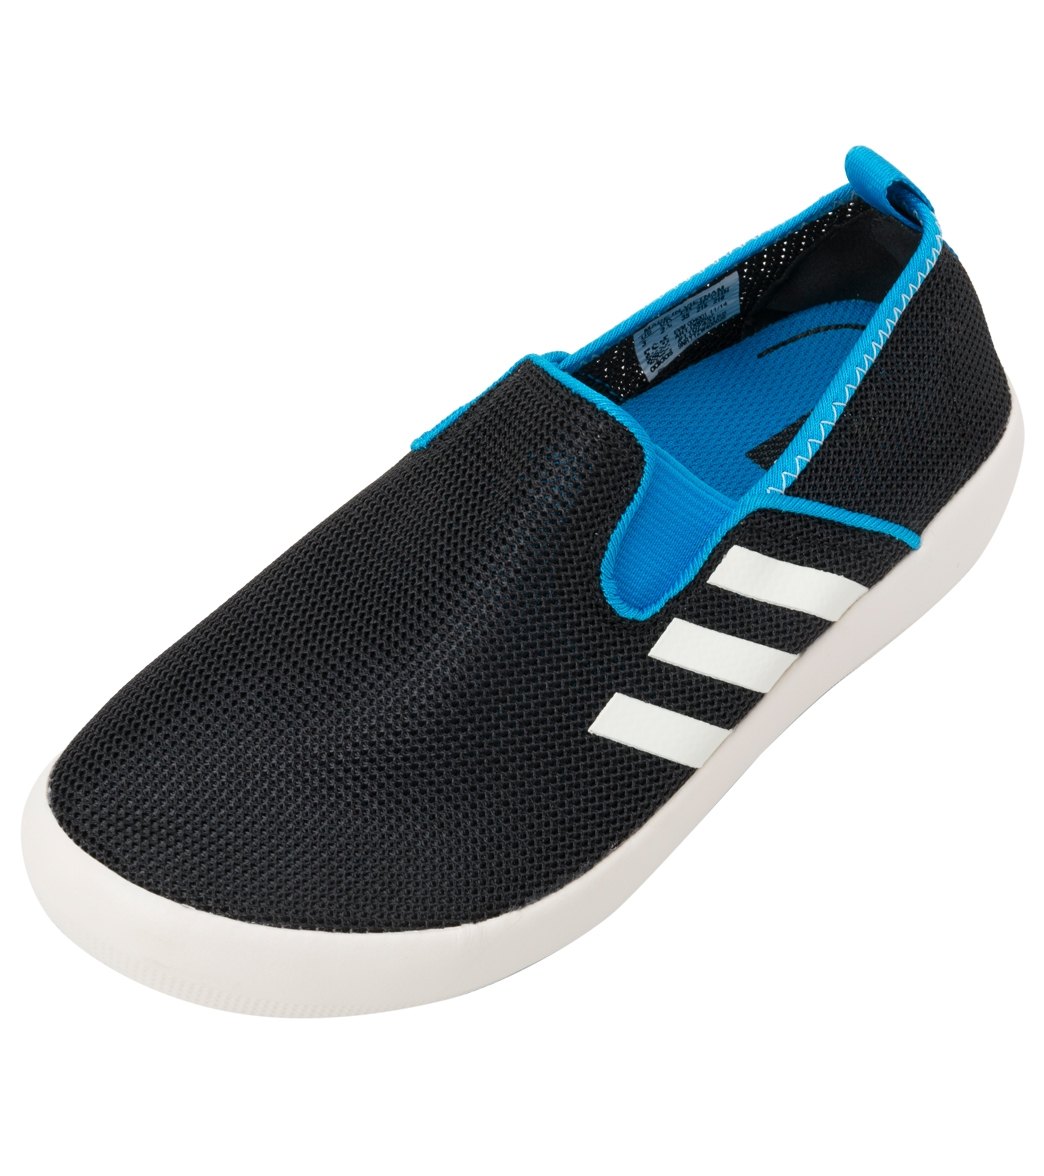 Adidas Kids' Boat Slip On Water Shoes at SwimOutlet.com